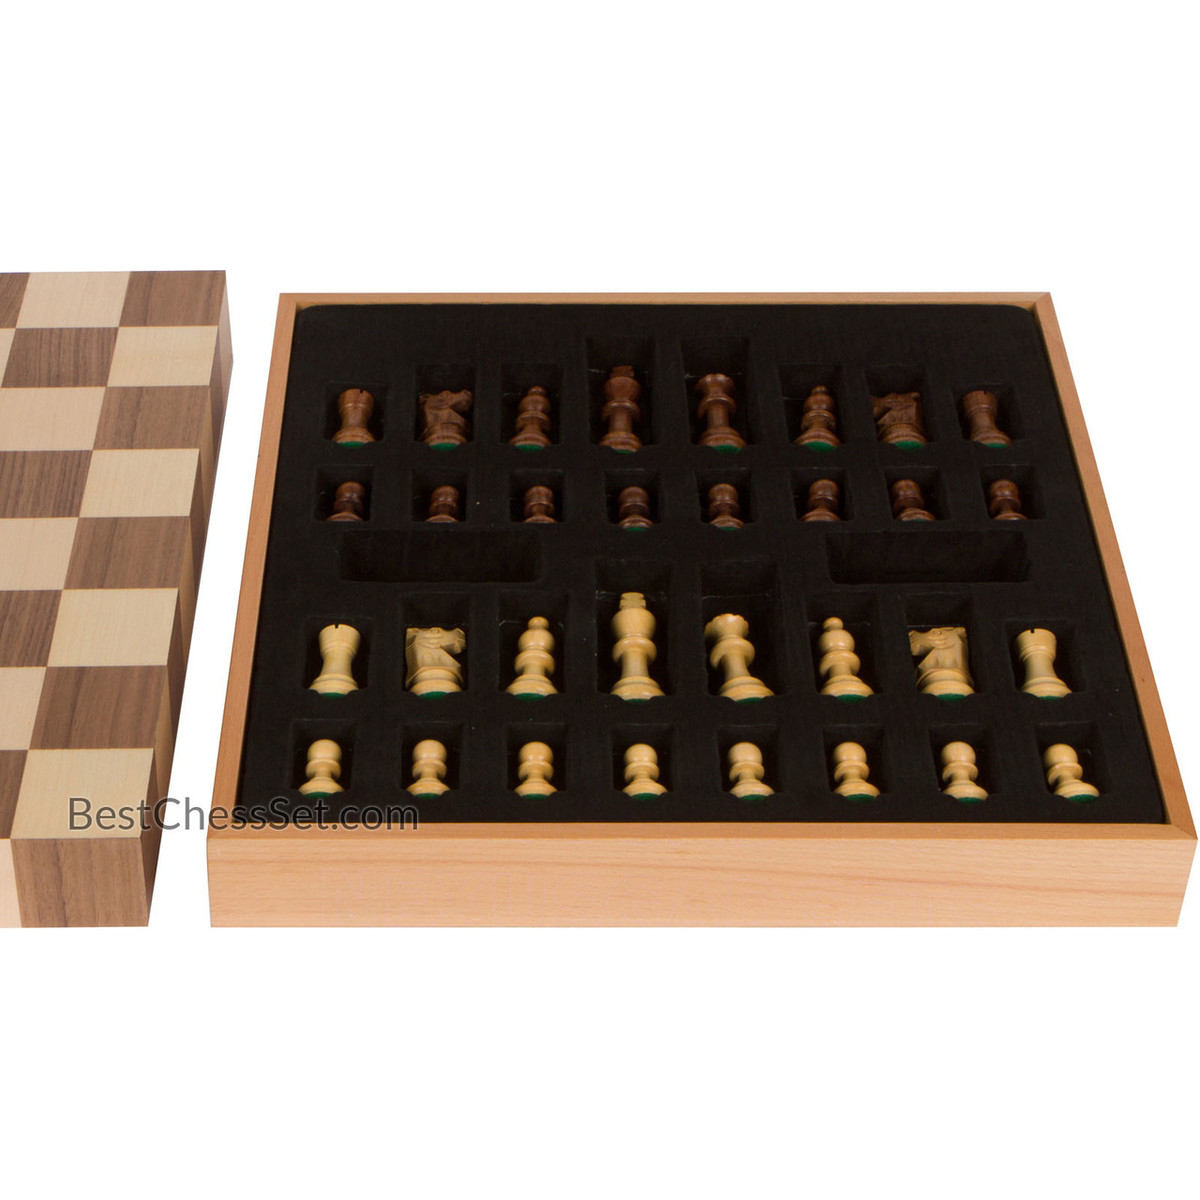 Athena Tournament Chess Inlaid Wood Board Game with Weighted